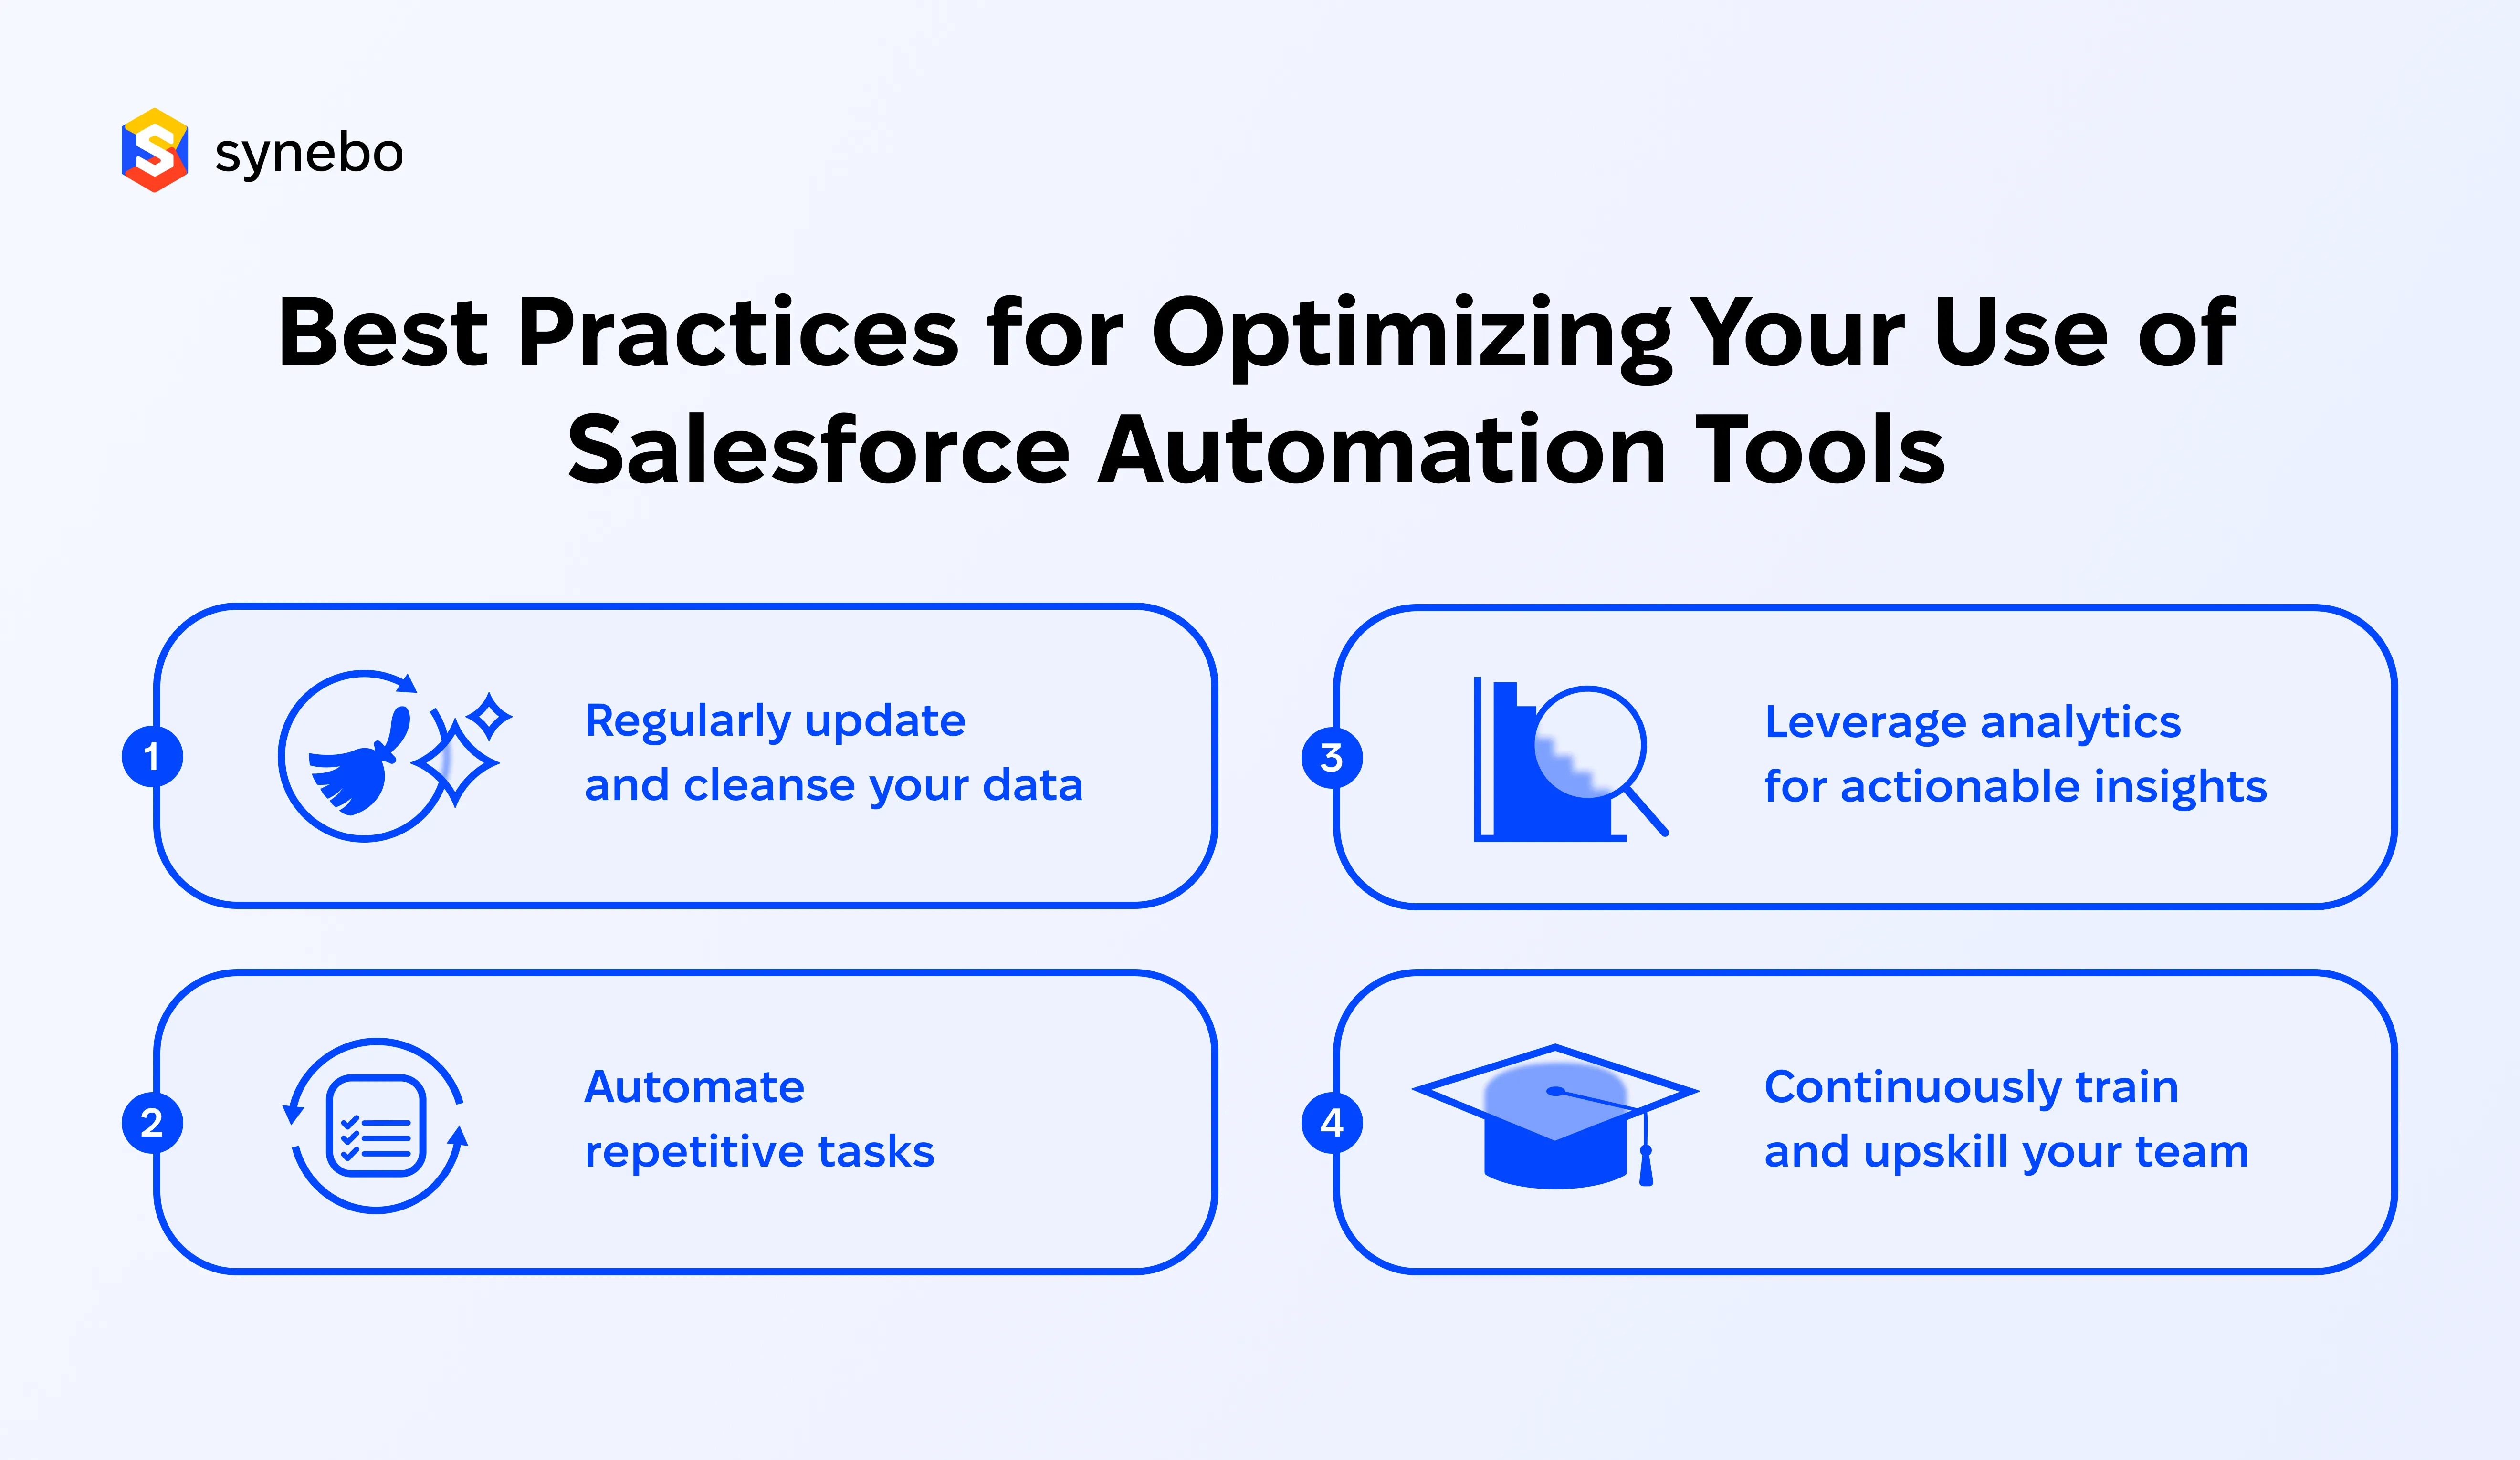 Best practices for optimizing your use of Salesforce automation tools